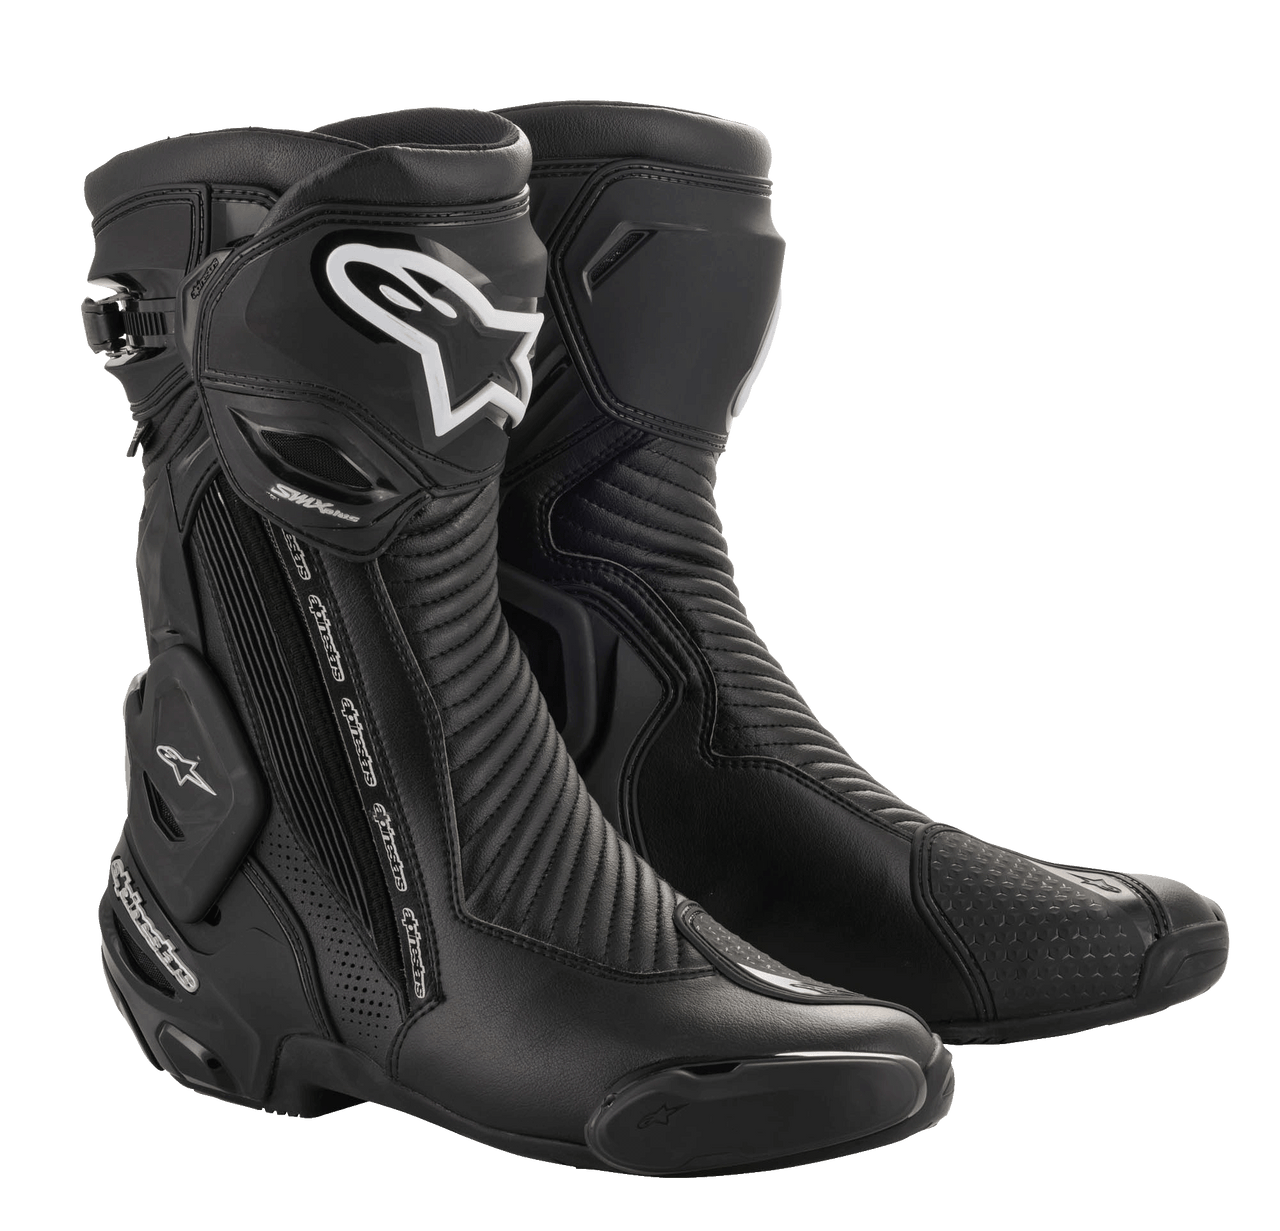 Road Adventure Touring Boots